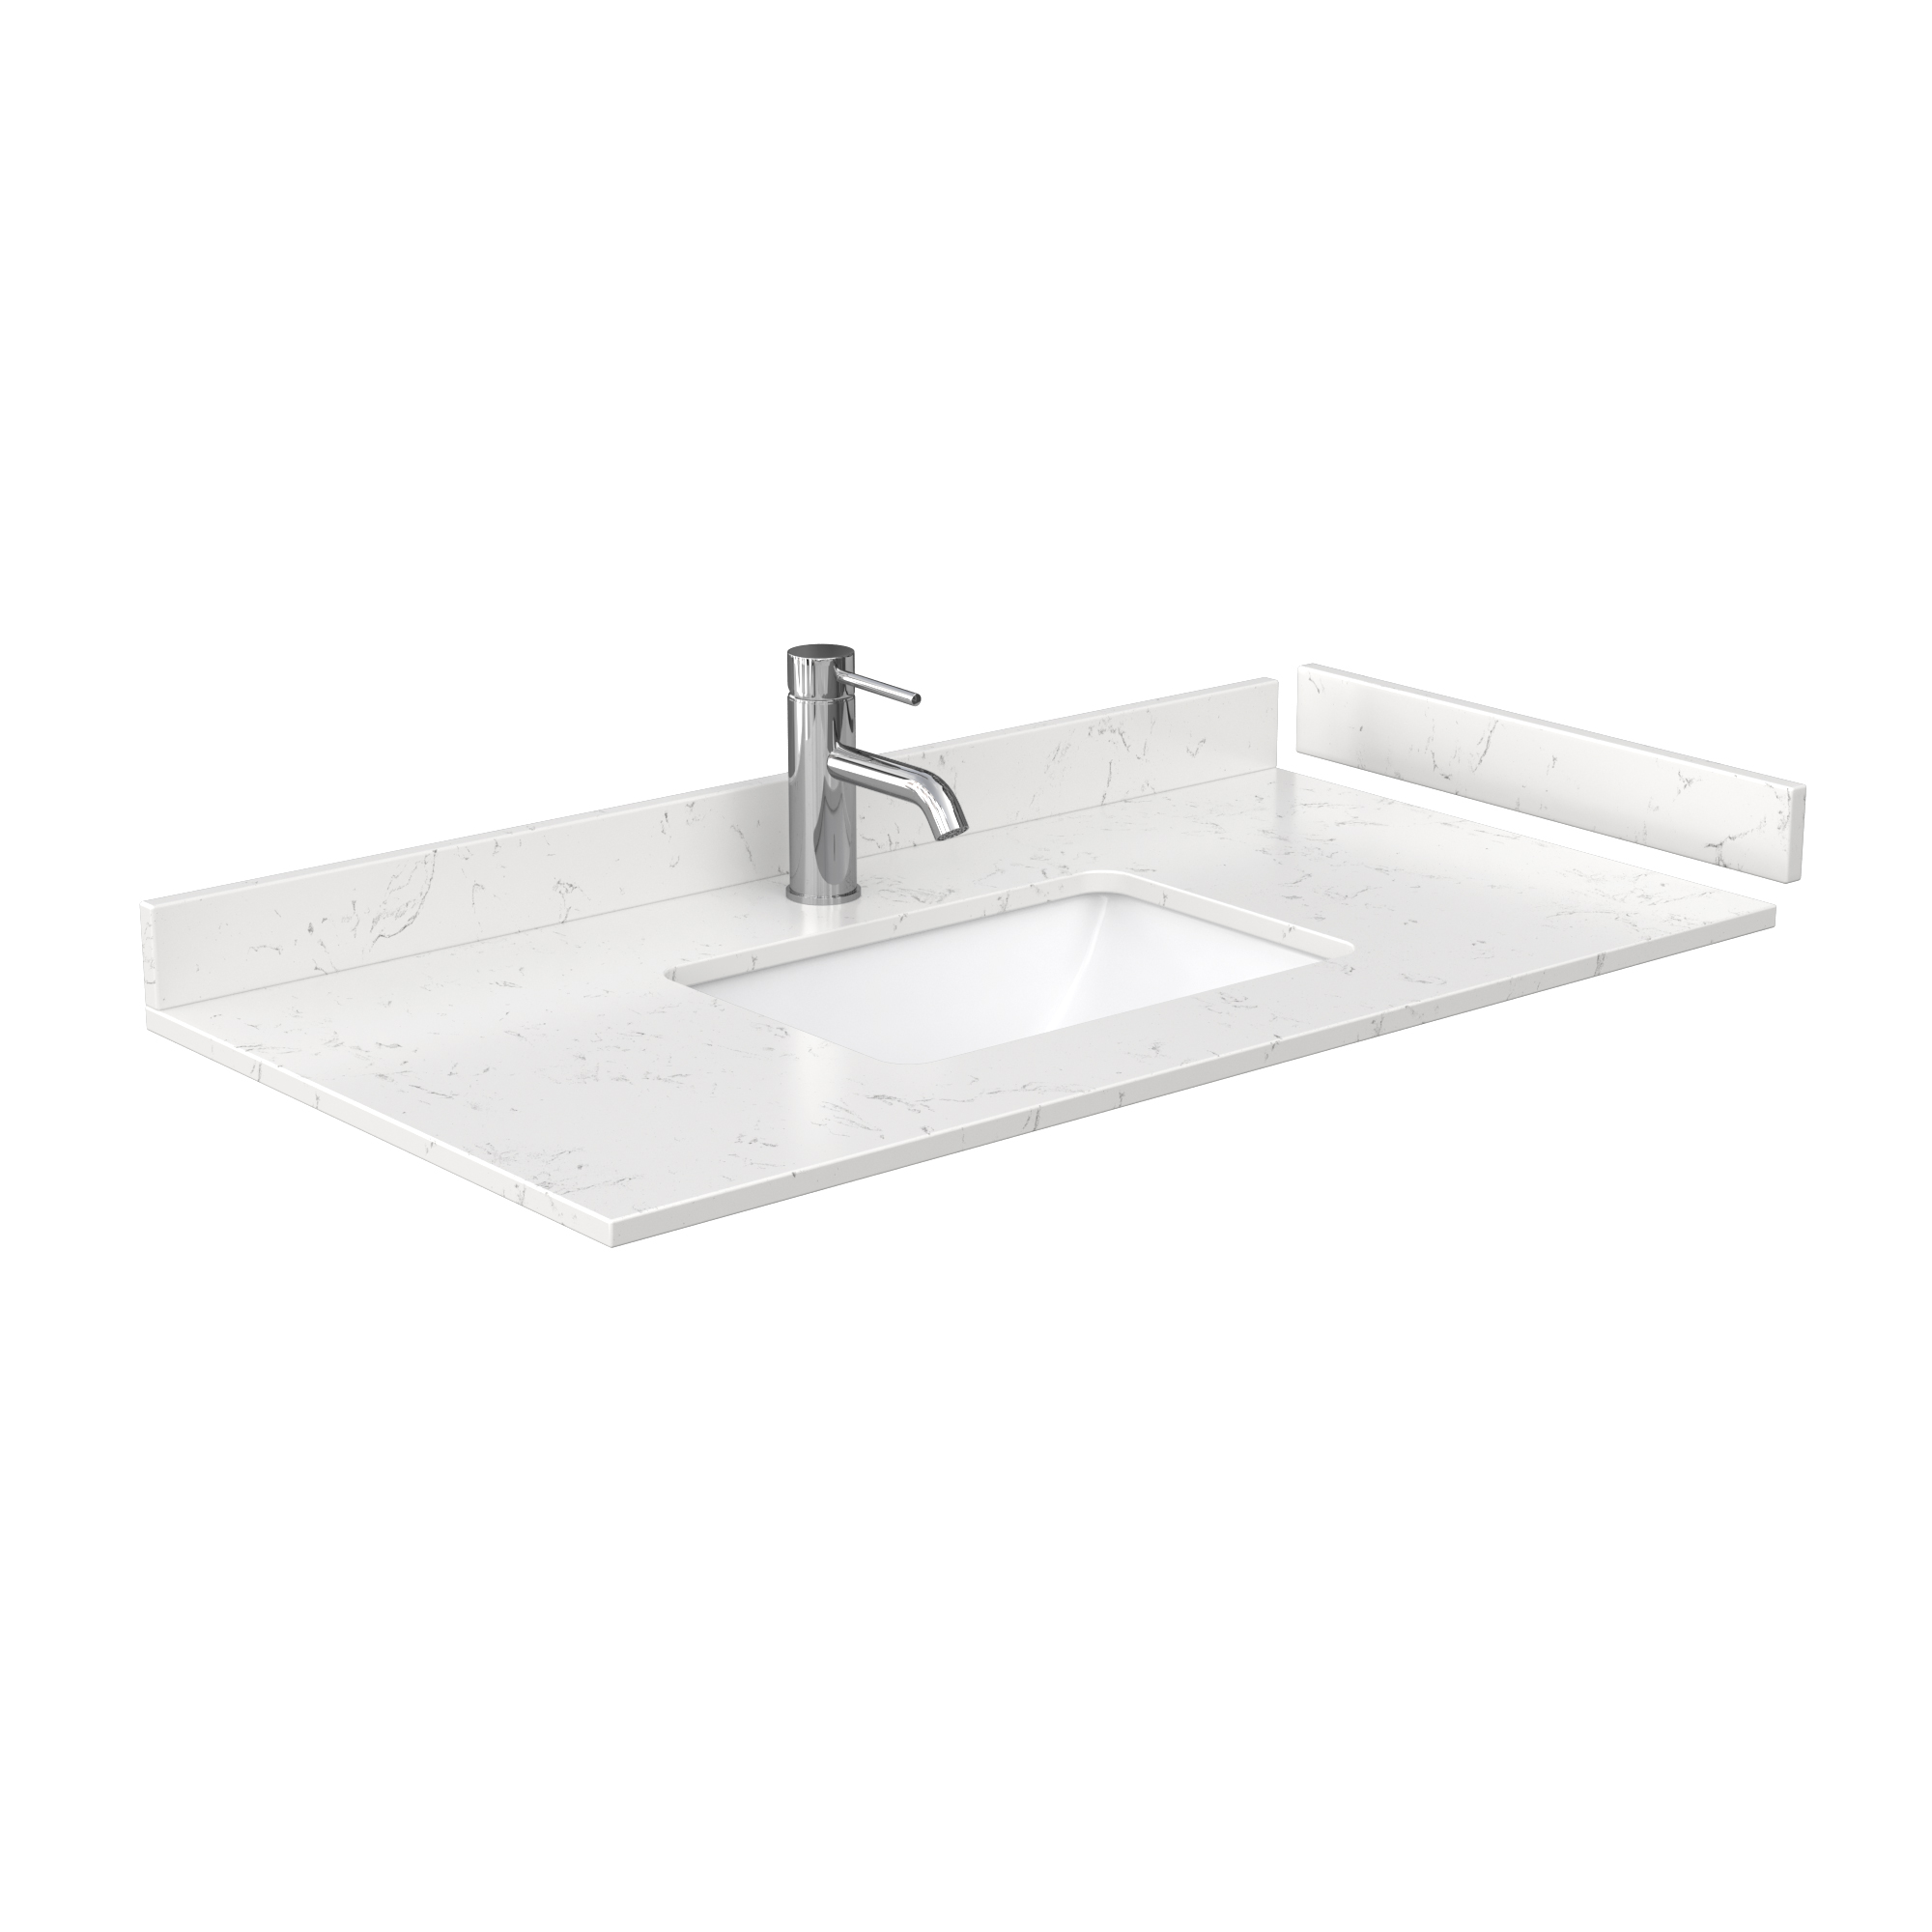 beckett 42" single bathroom vanity with toe kick, cultured marble counter - white